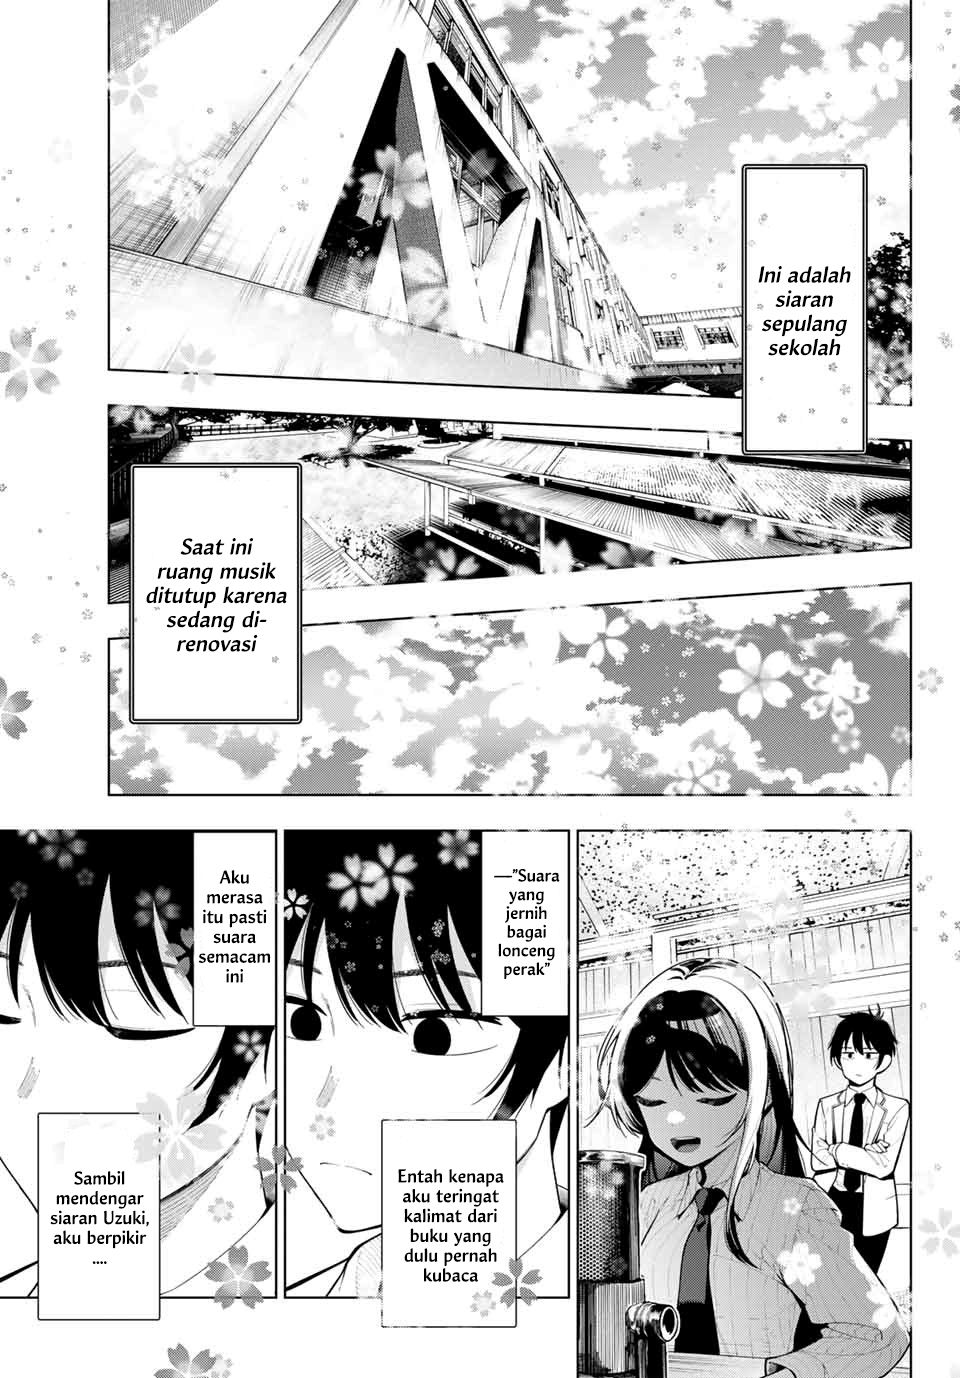 Mayonaka Heart Tune (Tune In to the Midnight Heart) Chapter 02 Image 14